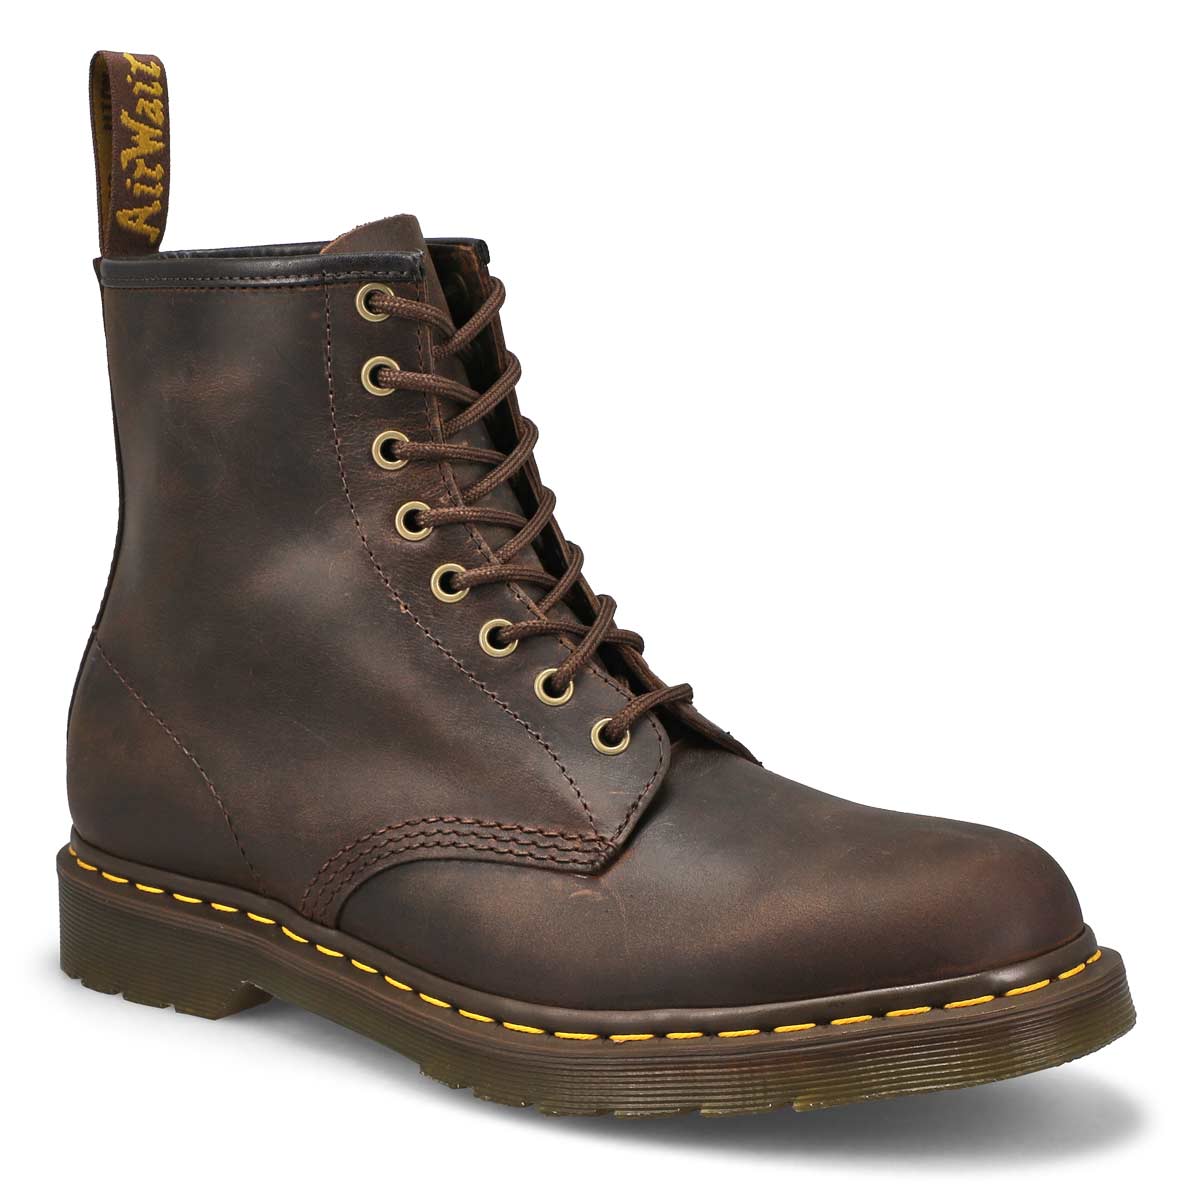 Dr Martens Men's1460 8-Eye Smooth Leather Boo | SoftMoc.com